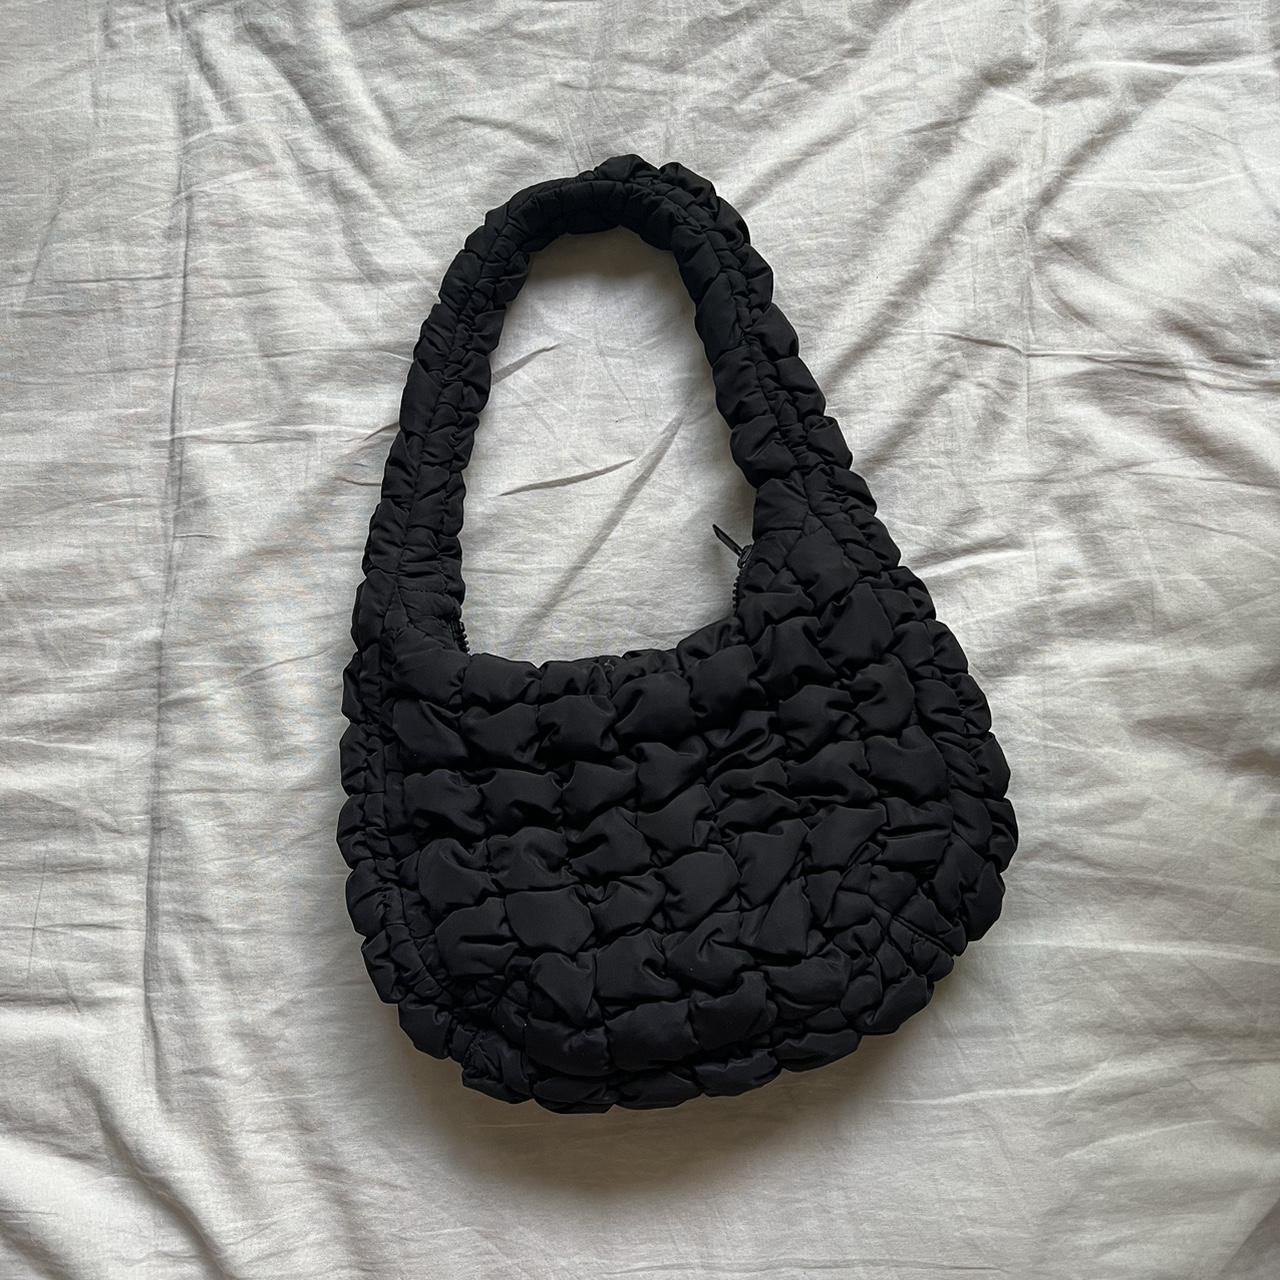 COS Oversized quilted bag (Black) Also available - Depop